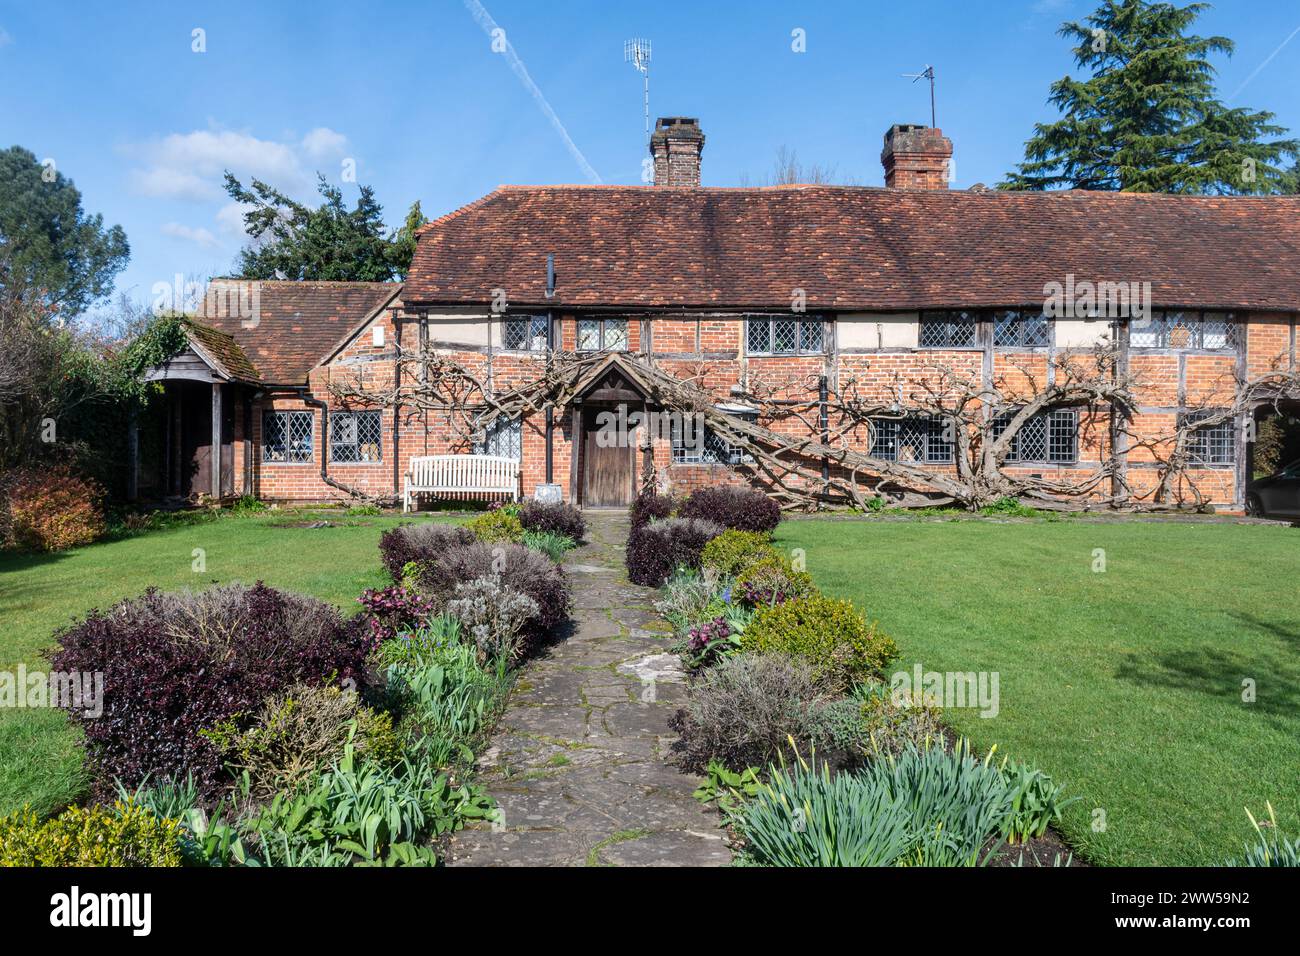 Pretty character cottage in Cranleigh, a Surrey village, England, UK, a grade II listed 17th century building Stock Photo